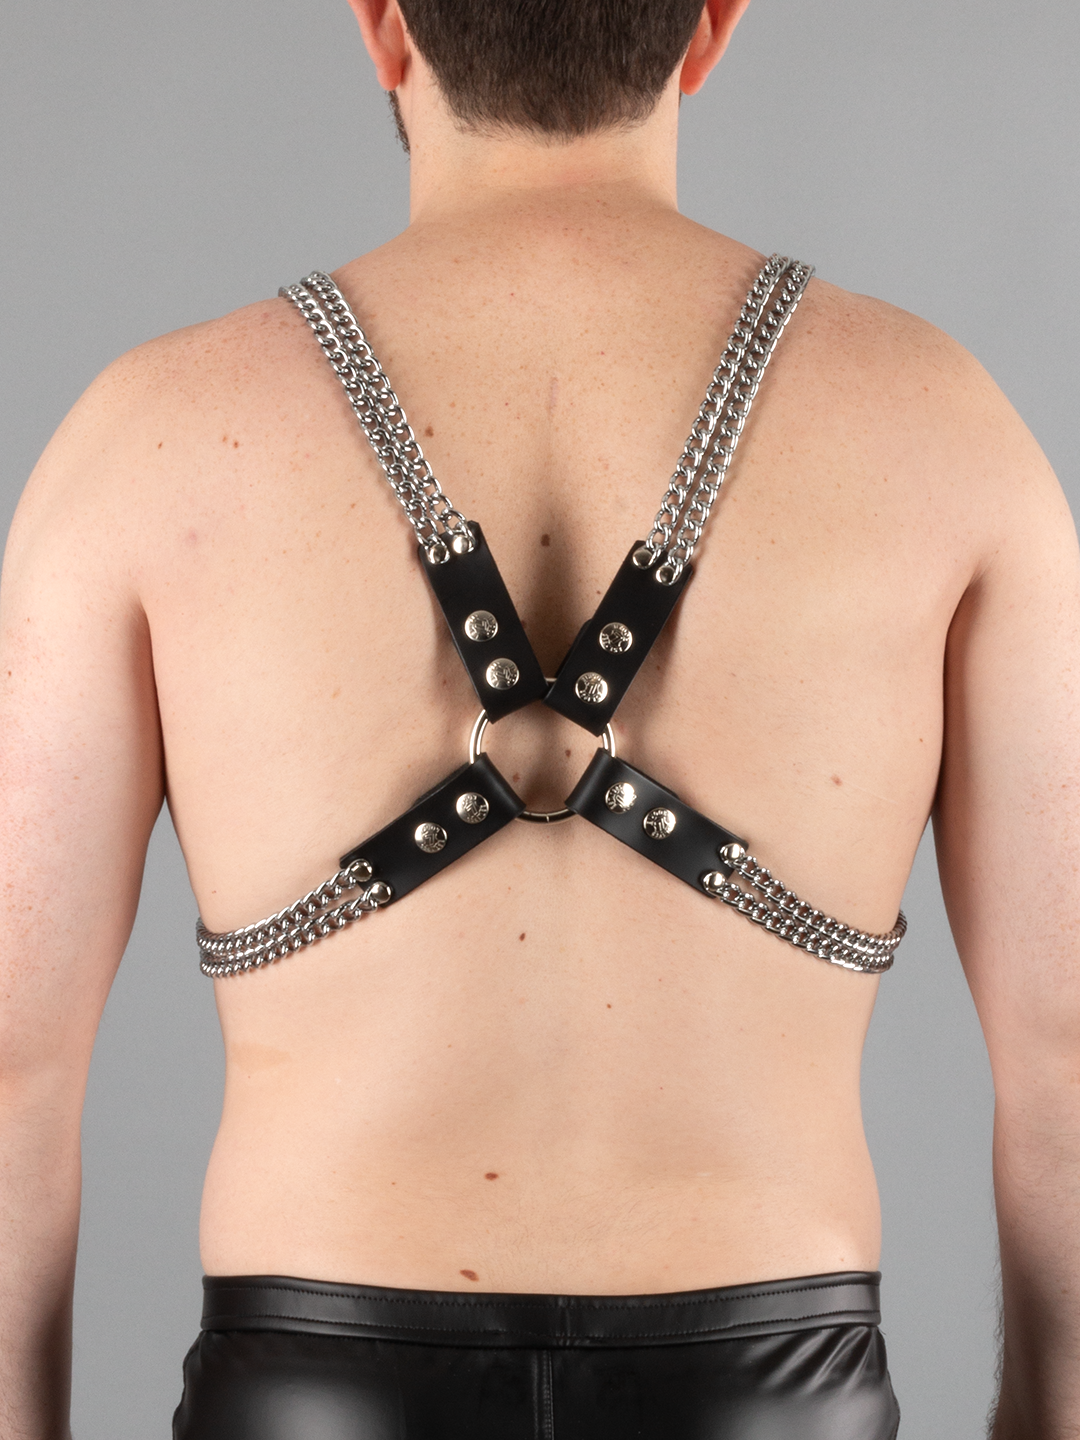 Double Chain Harness with Leather Accents